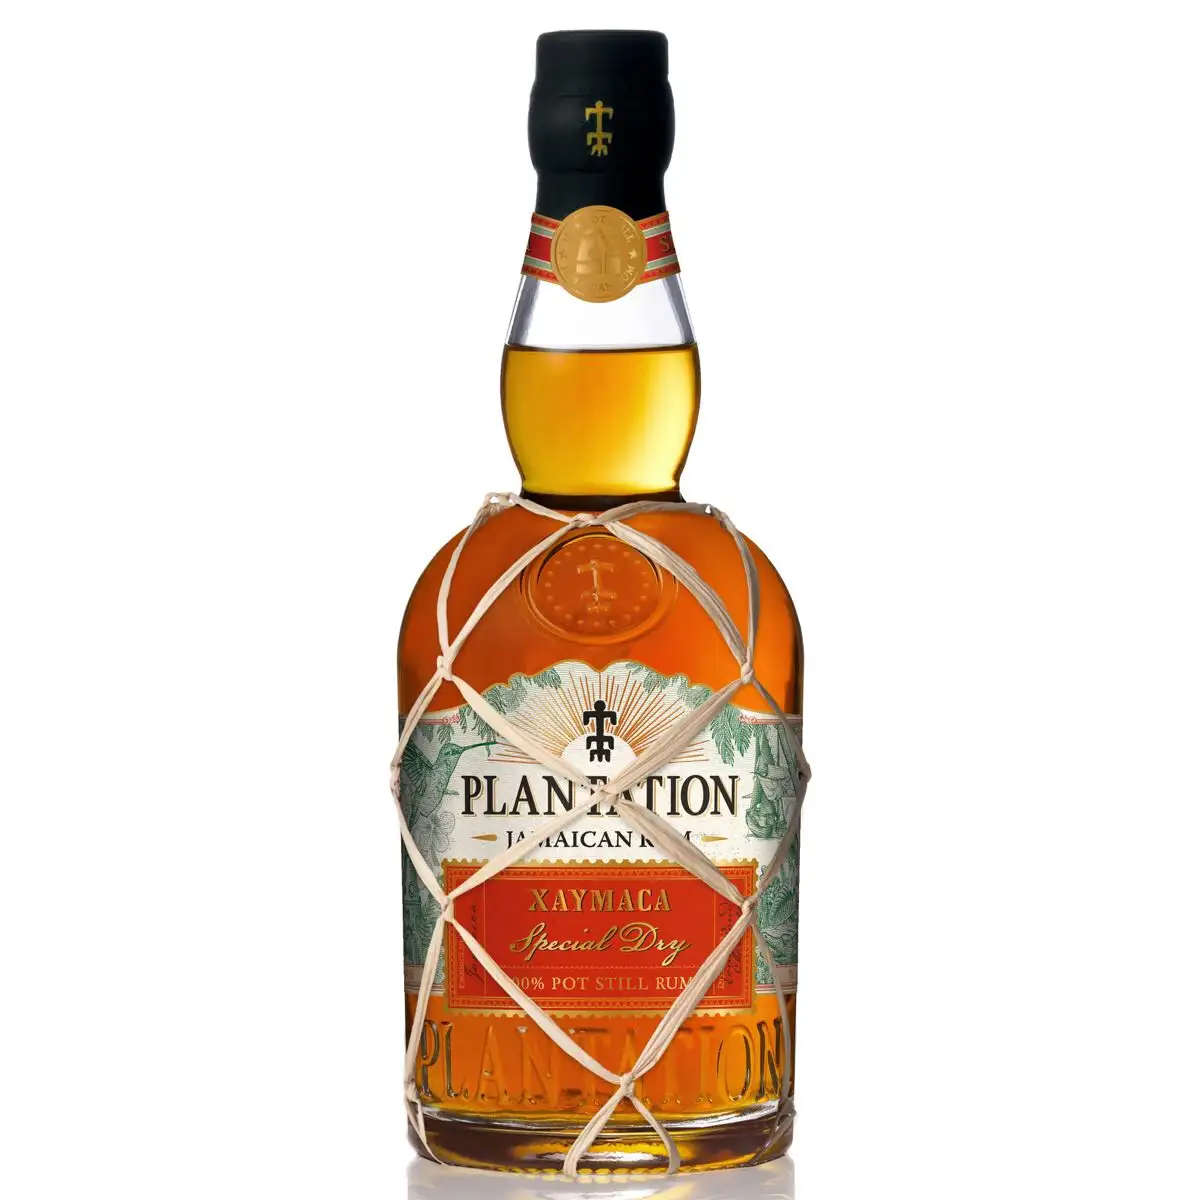 Image of the front of the bottle of the rum Plantation XAYMACA Special Dry